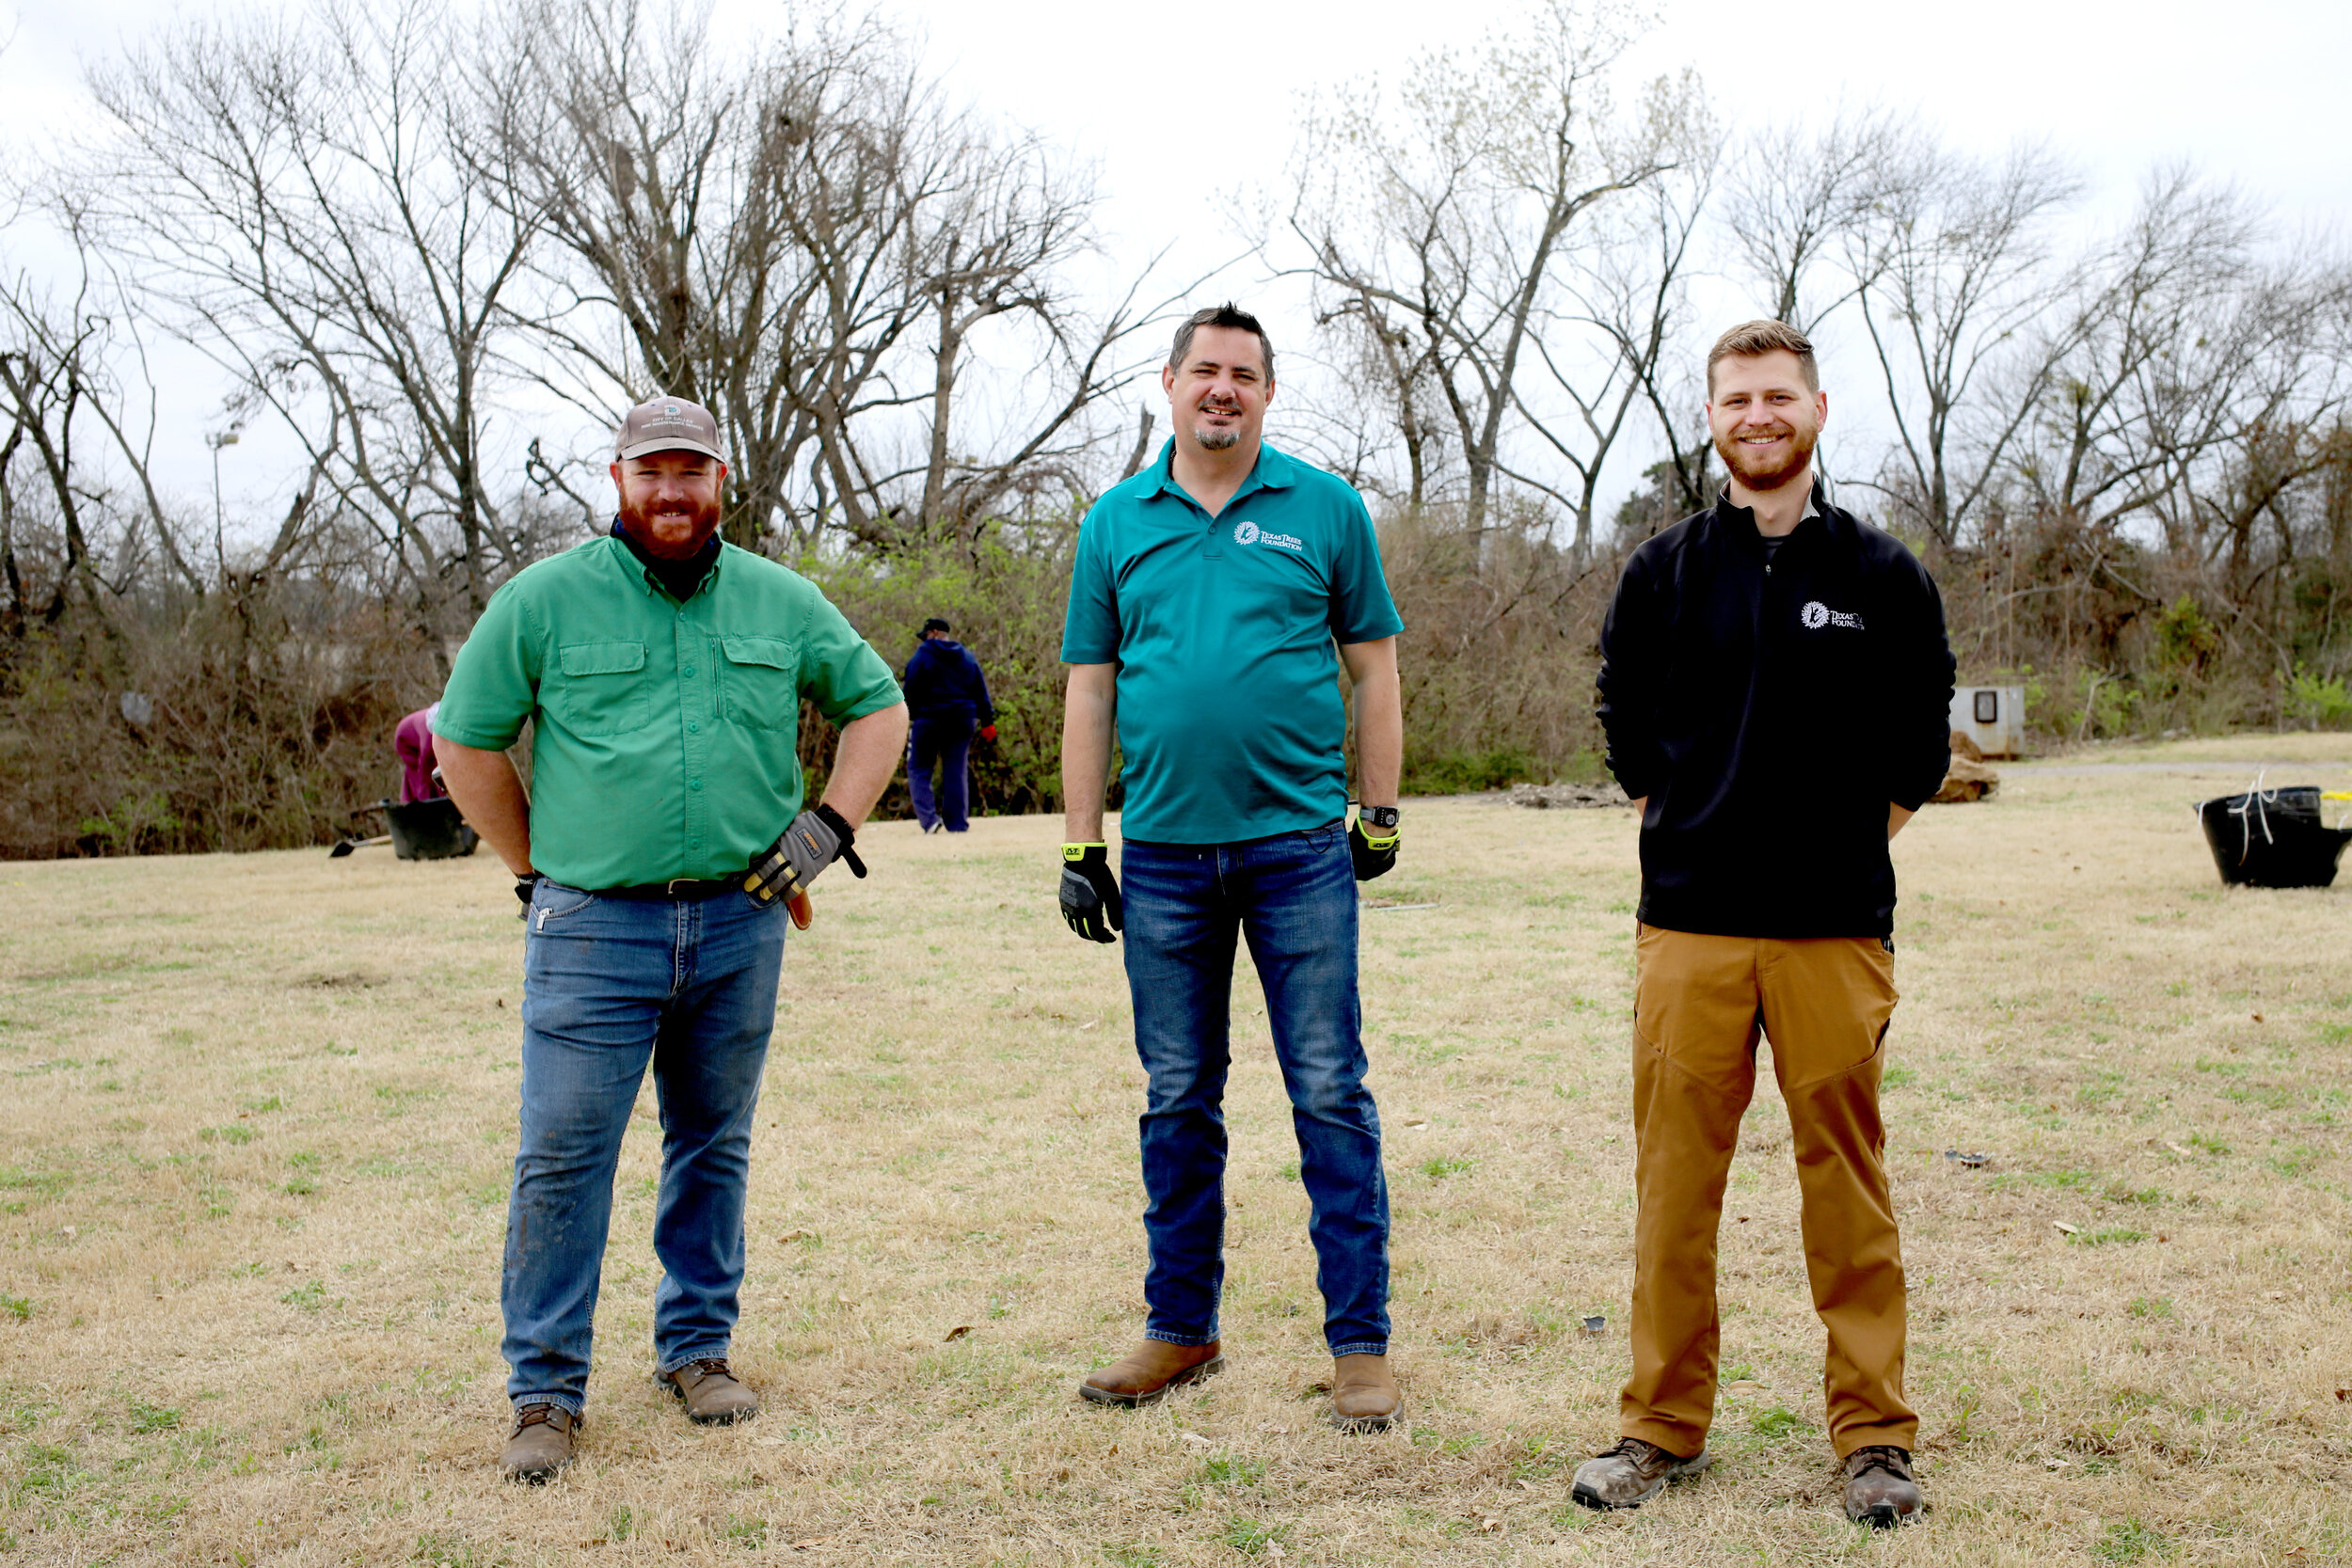 (Left to Right) Chris McMaster, City Forester, Park and Recreation Department; Norm Daley, Director of Operations, Texas Trees Foundation; Zach Wirtz, Urban Forestry Manager, Texas Trees Foundation